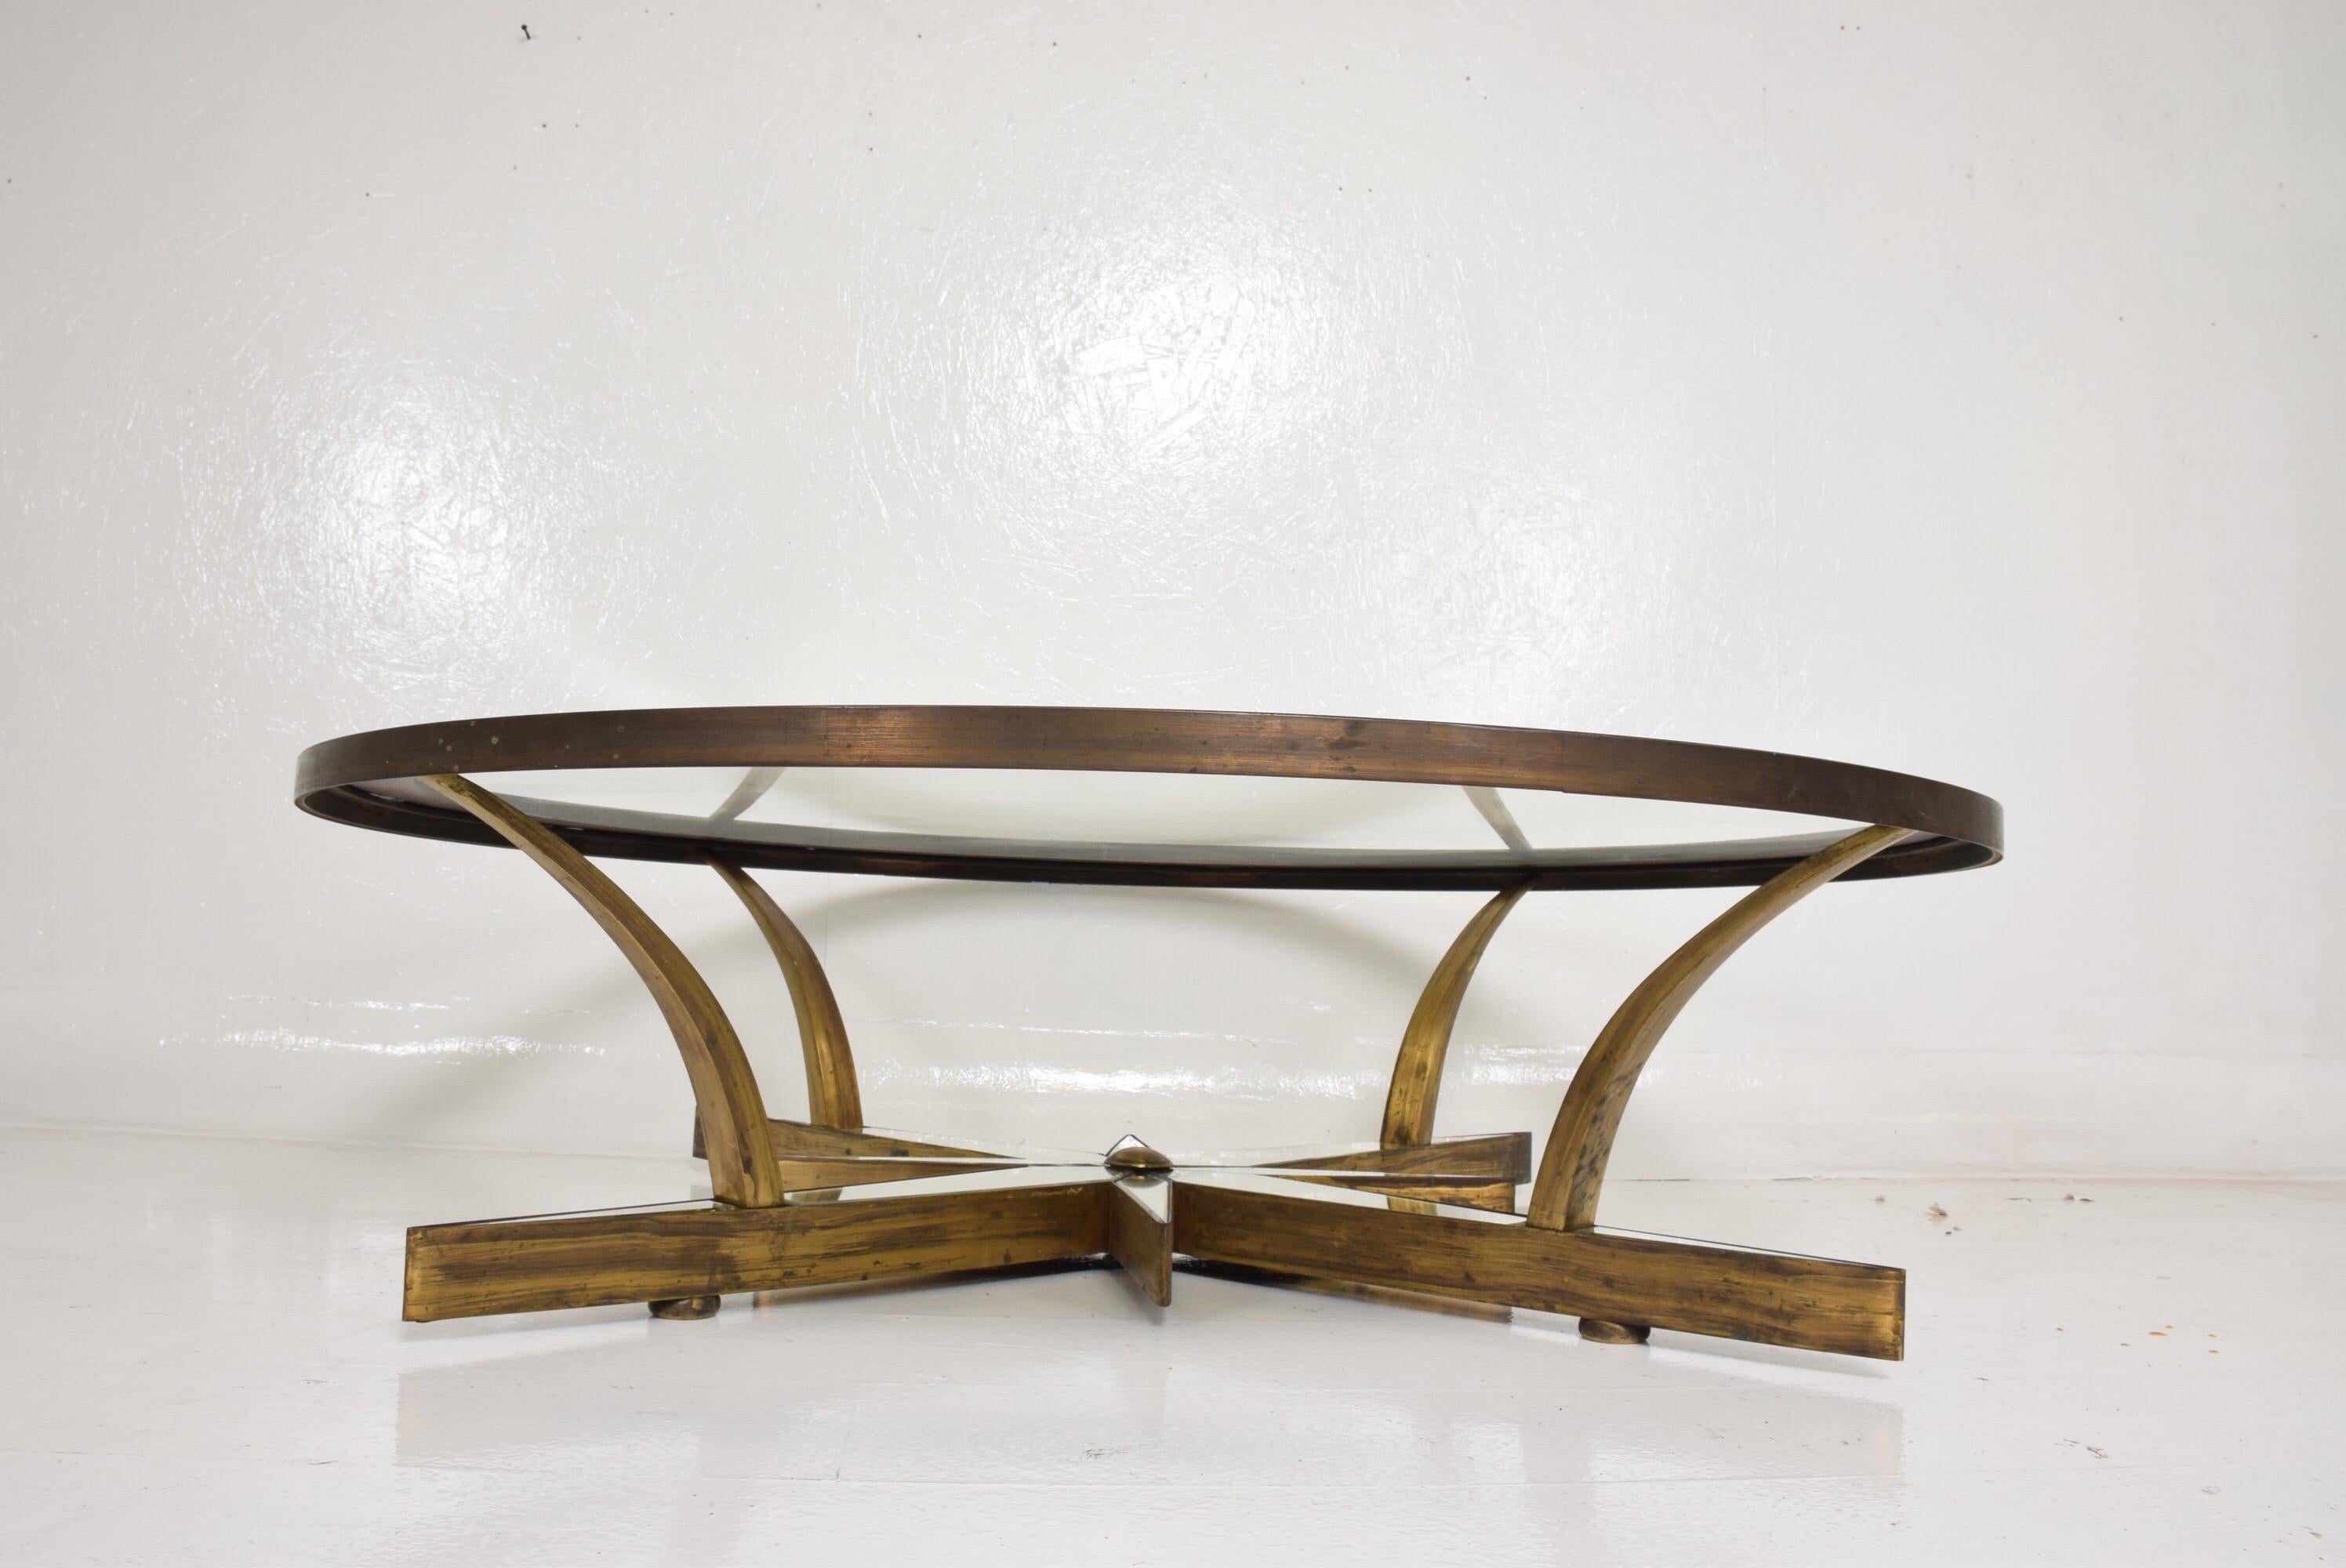 Mexican Mid-Century Modern Star Coffee, Cocktail Table Attributed to Arturo Pani